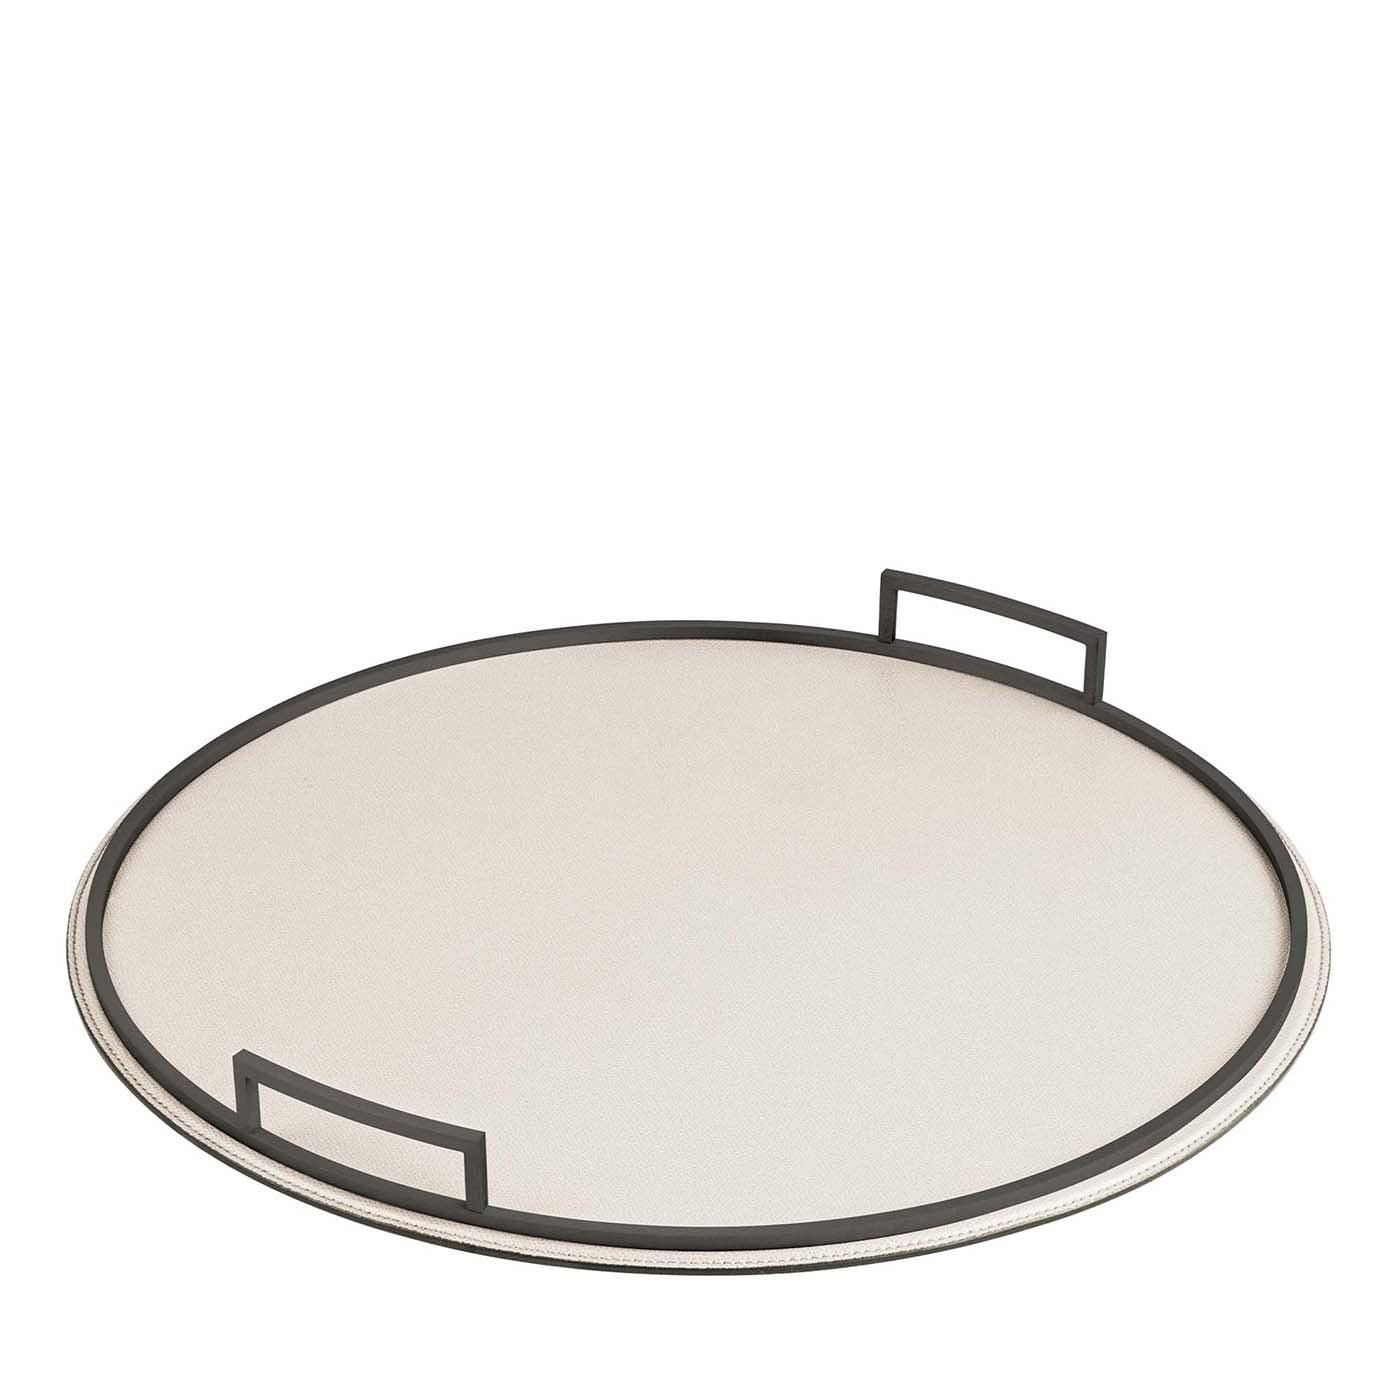 DEFILE ROUND LARGE TRAY  - Main view